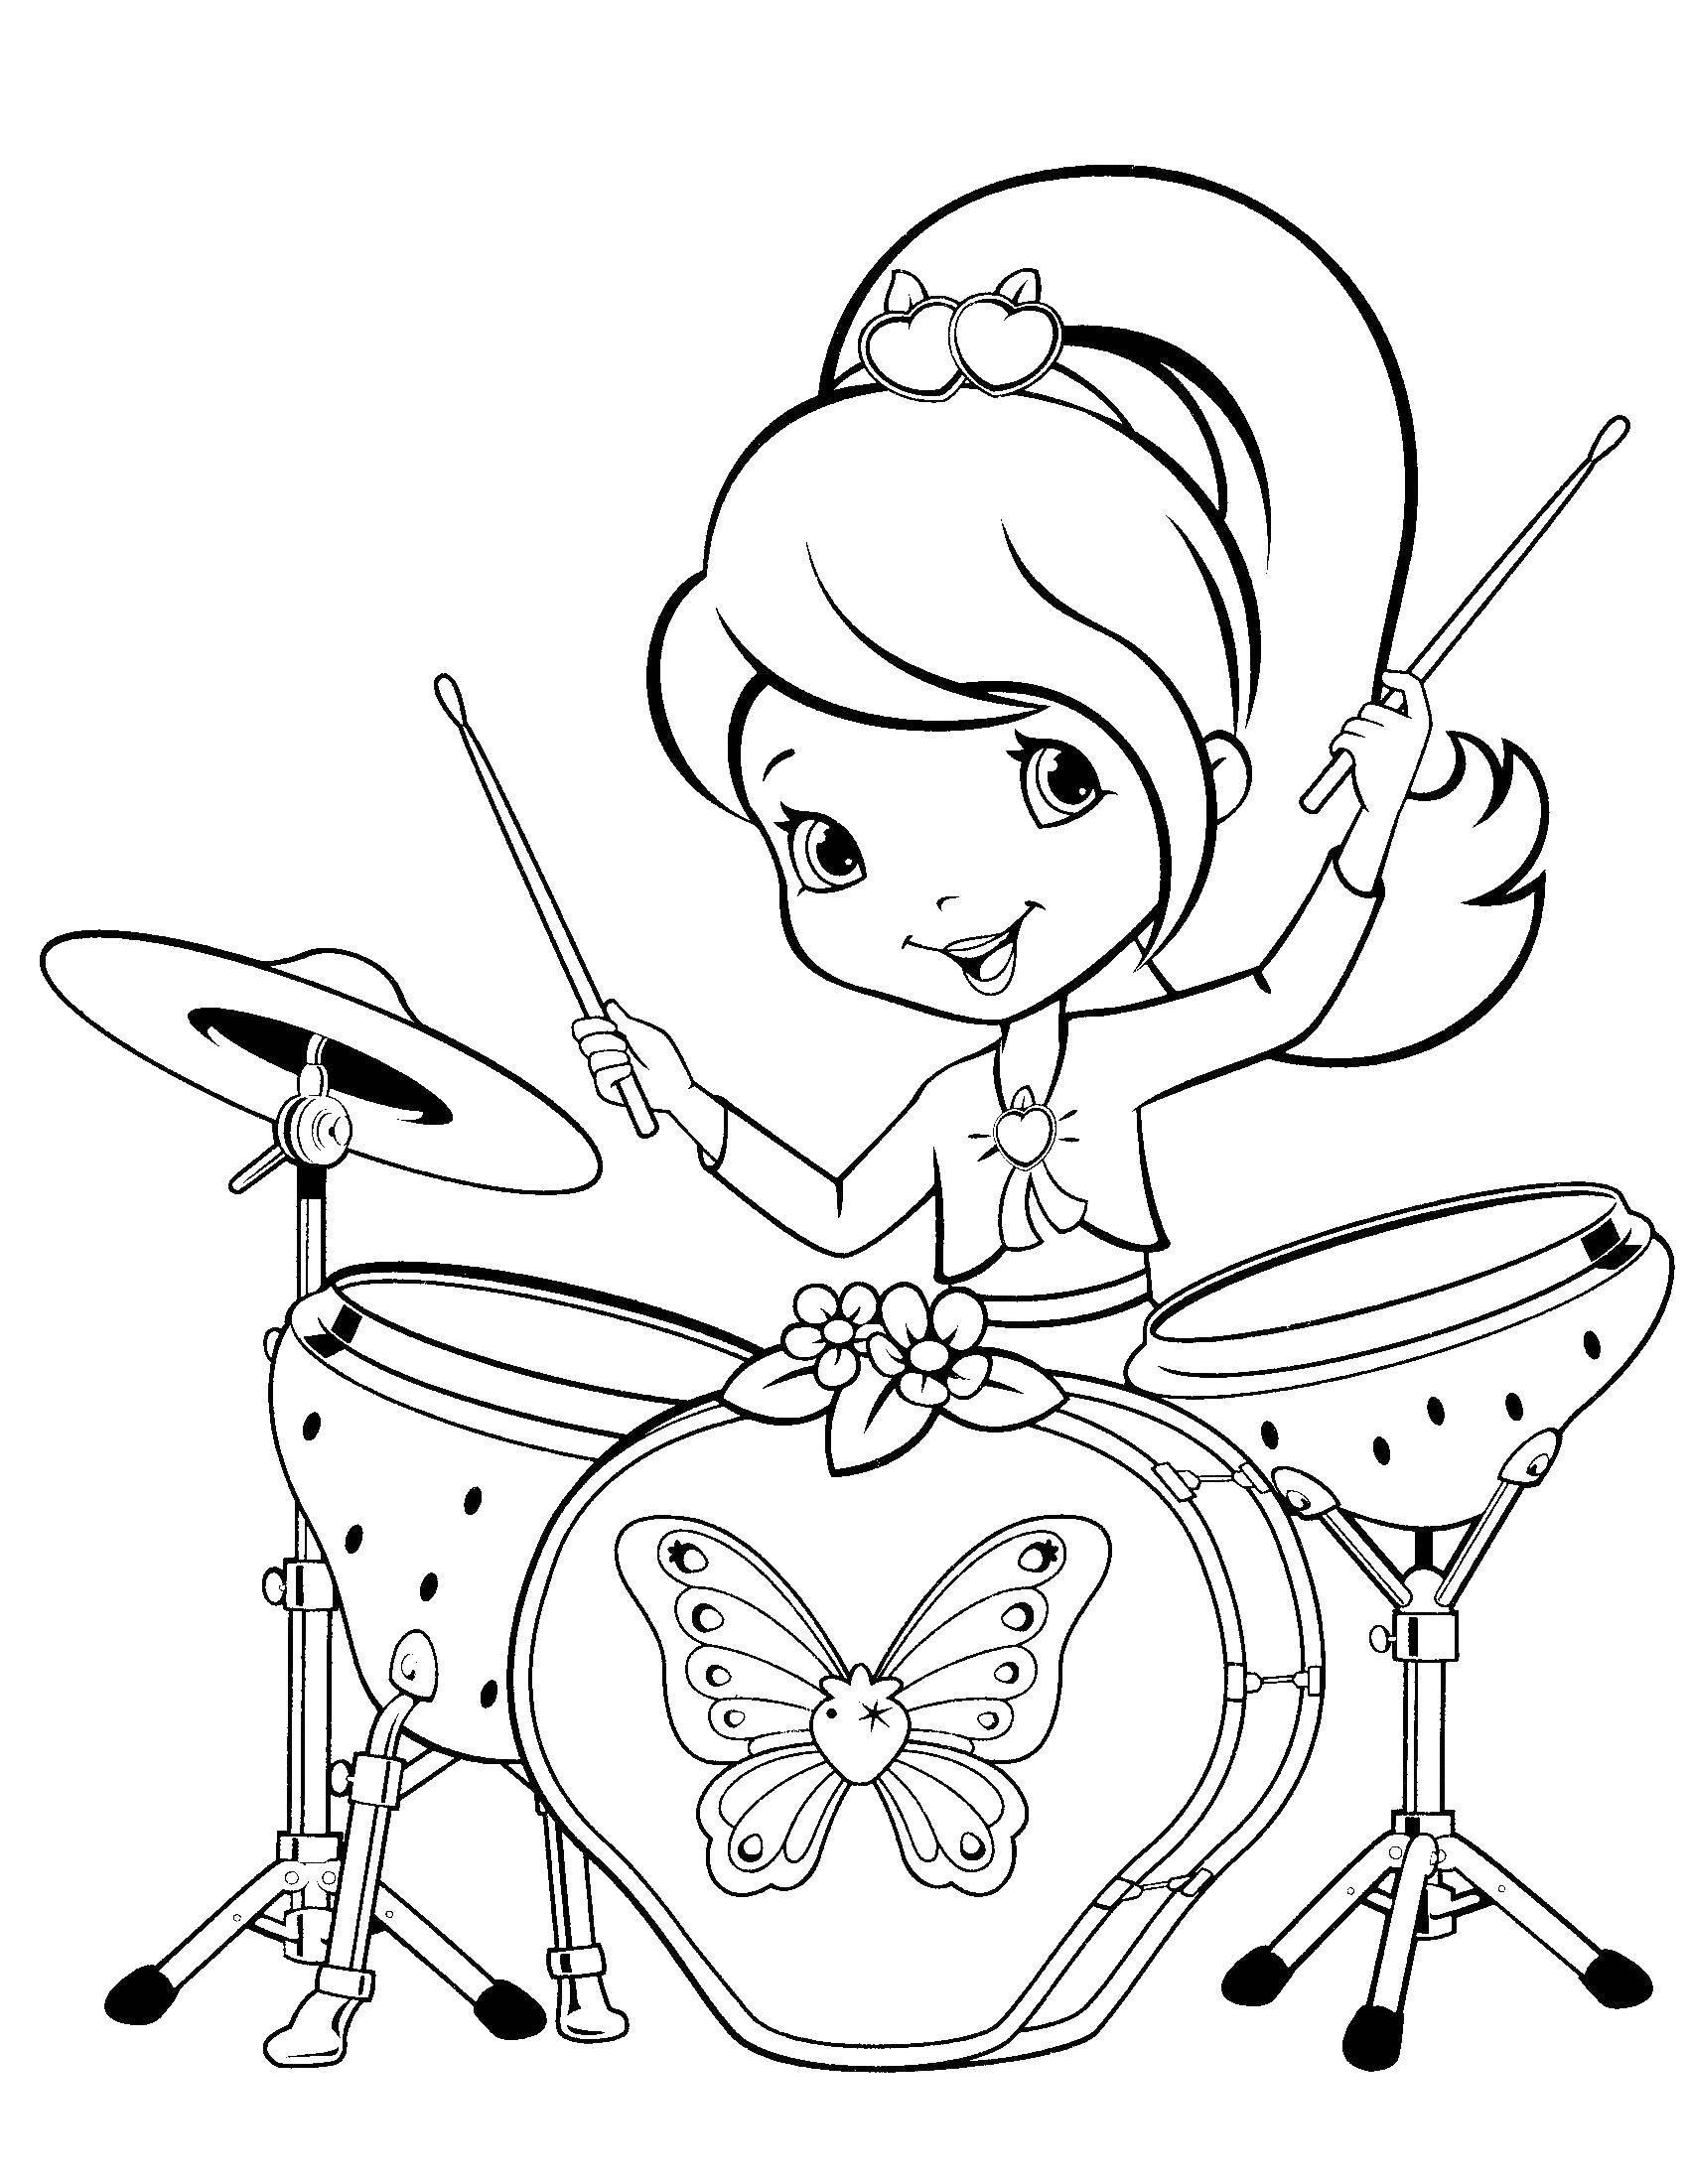 Coloring Charlotte strawberry plays the drums. Category Charlotte zemlyanichka cartoons. Tags:  Charlotte, a strawberry, cartoons.